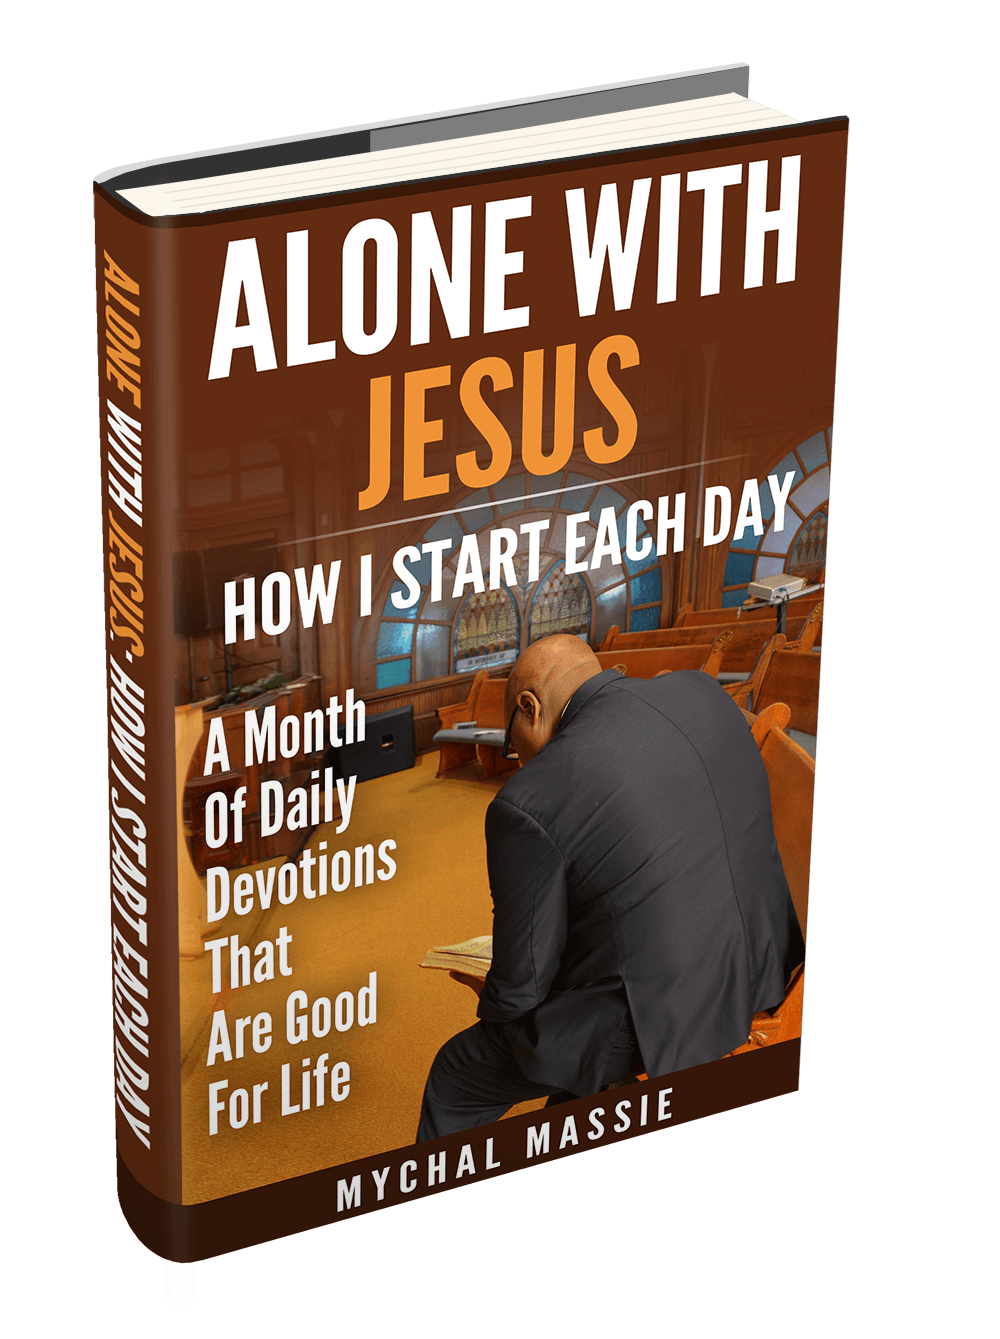 Alone With Jesus - How I Start Each Day - Book Title